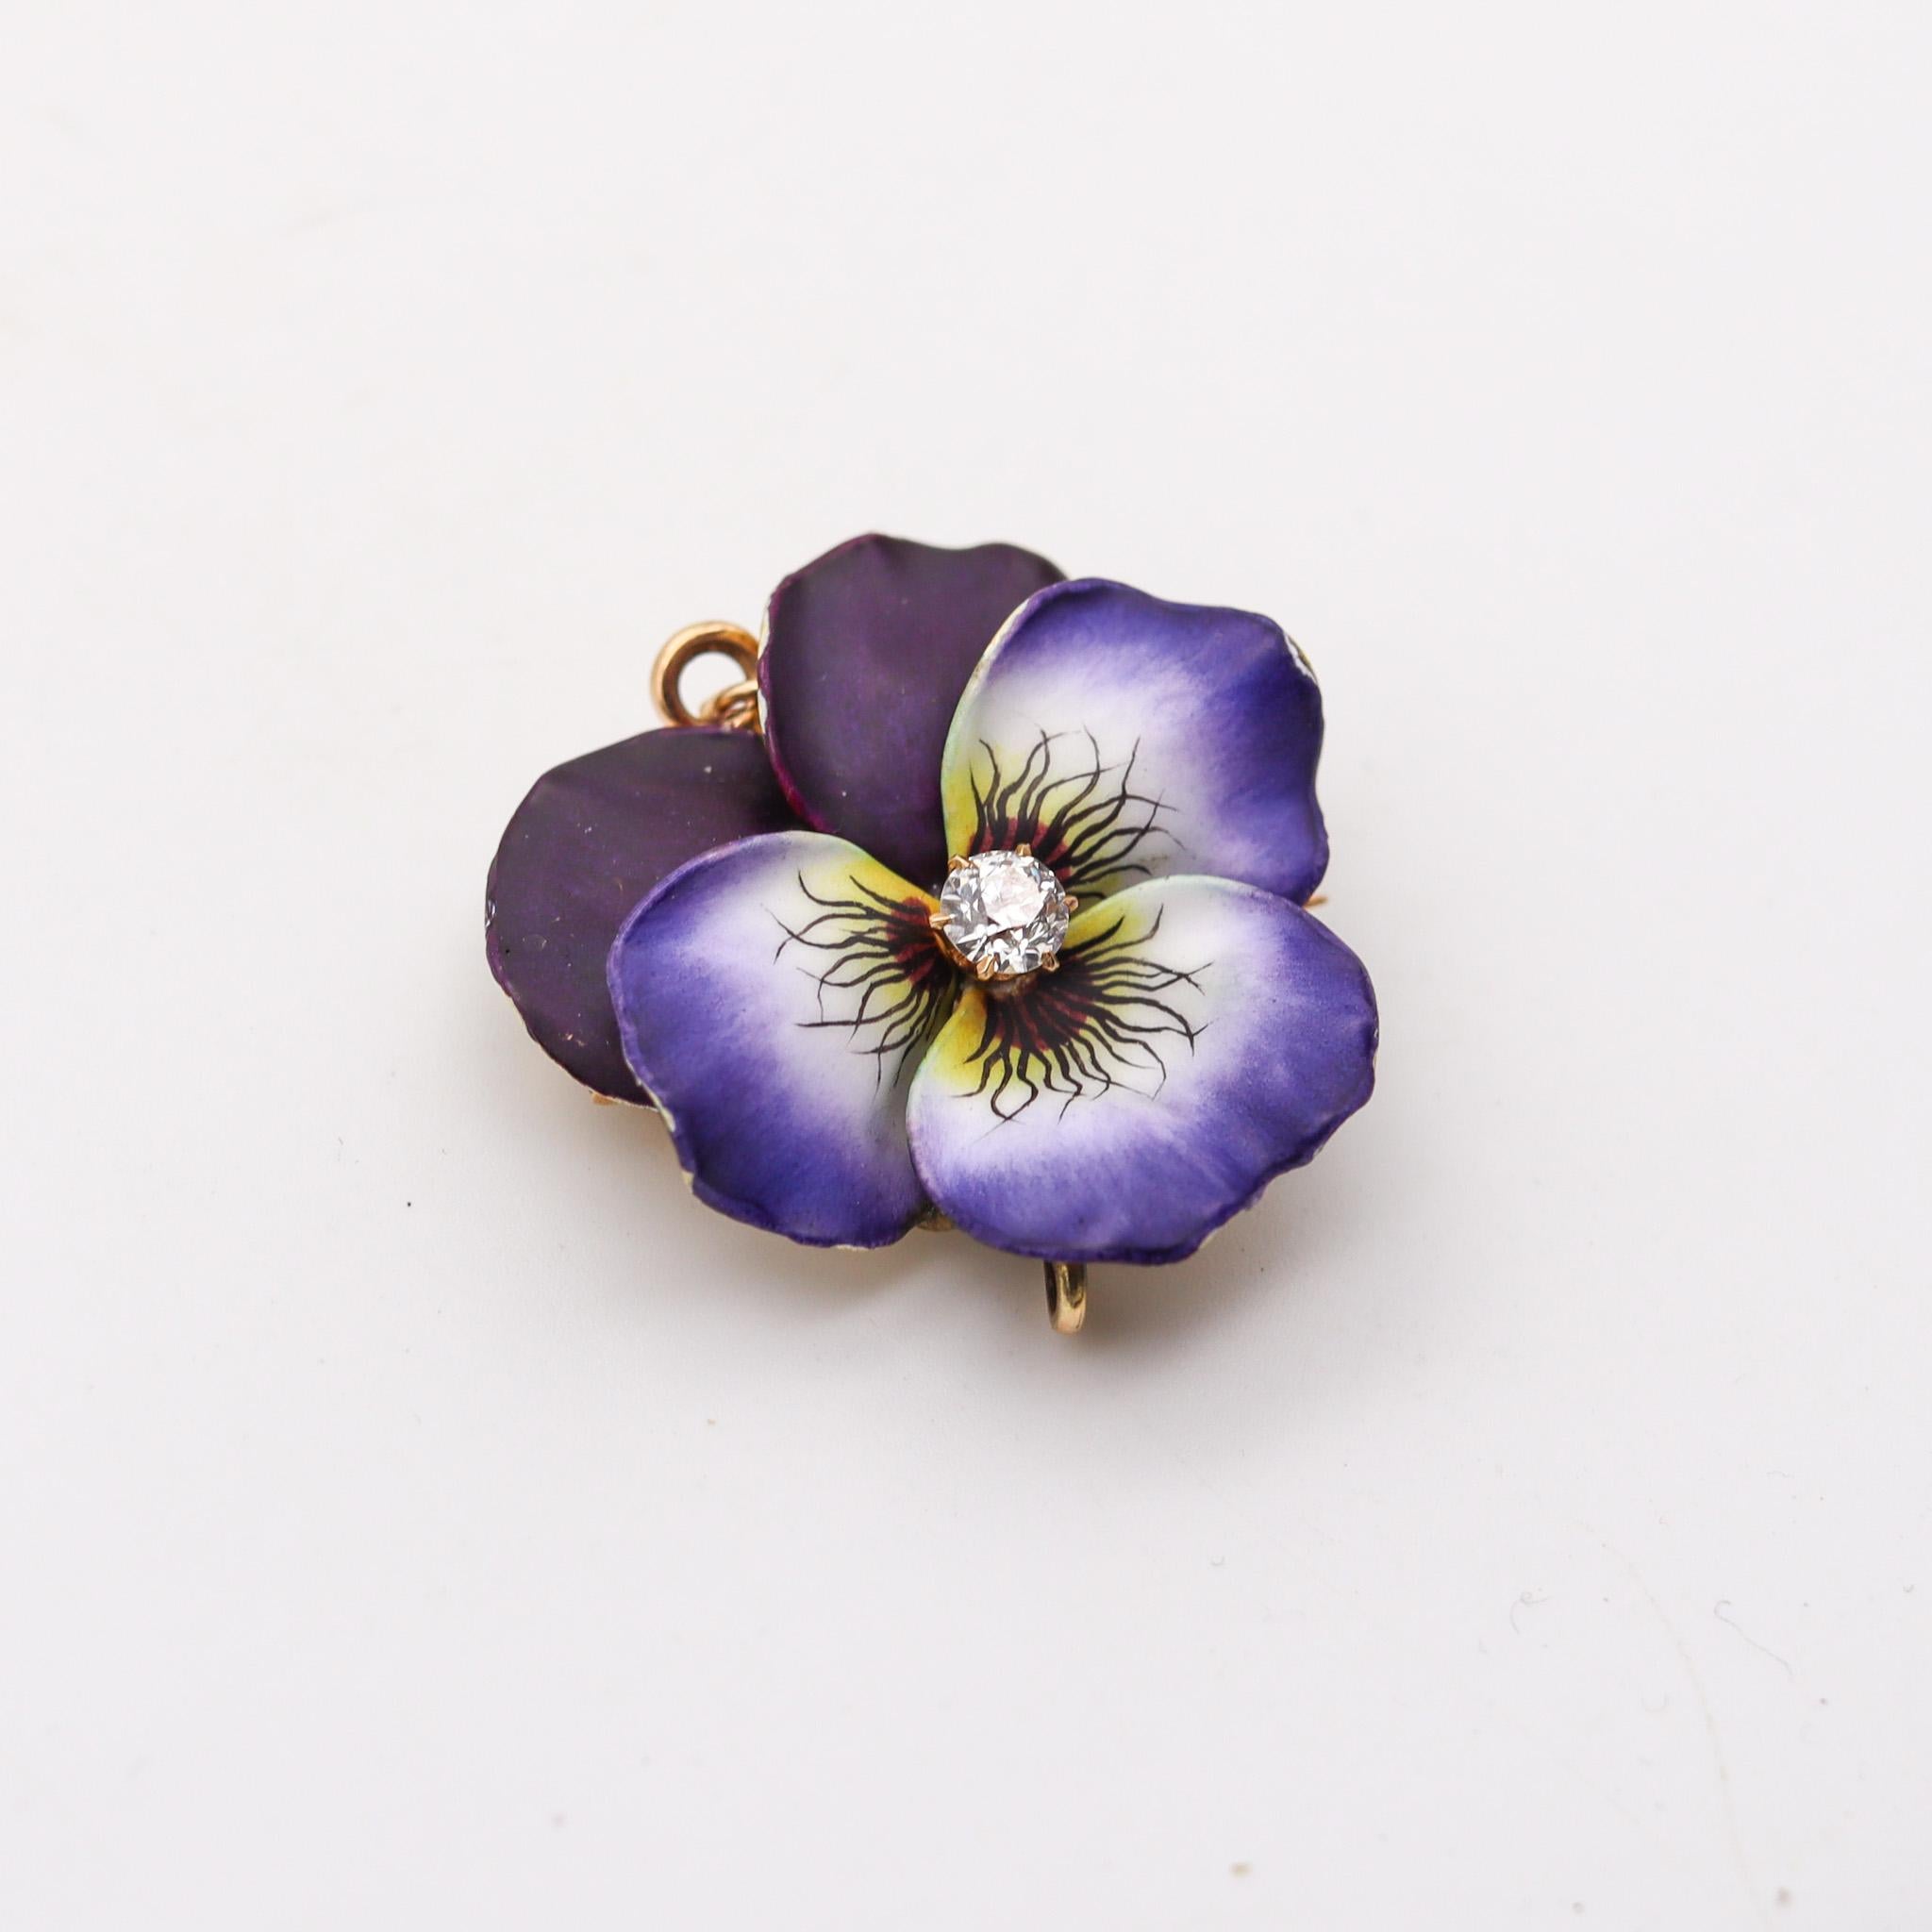 Edwardian enameled convertible flower brooch designed by A. J. Hedges.

An exceptional three-dimensional five-petals pansy flower, created in New Jersey North America during the Edwardian and the Art Nouveau periods, back in the 1900. This